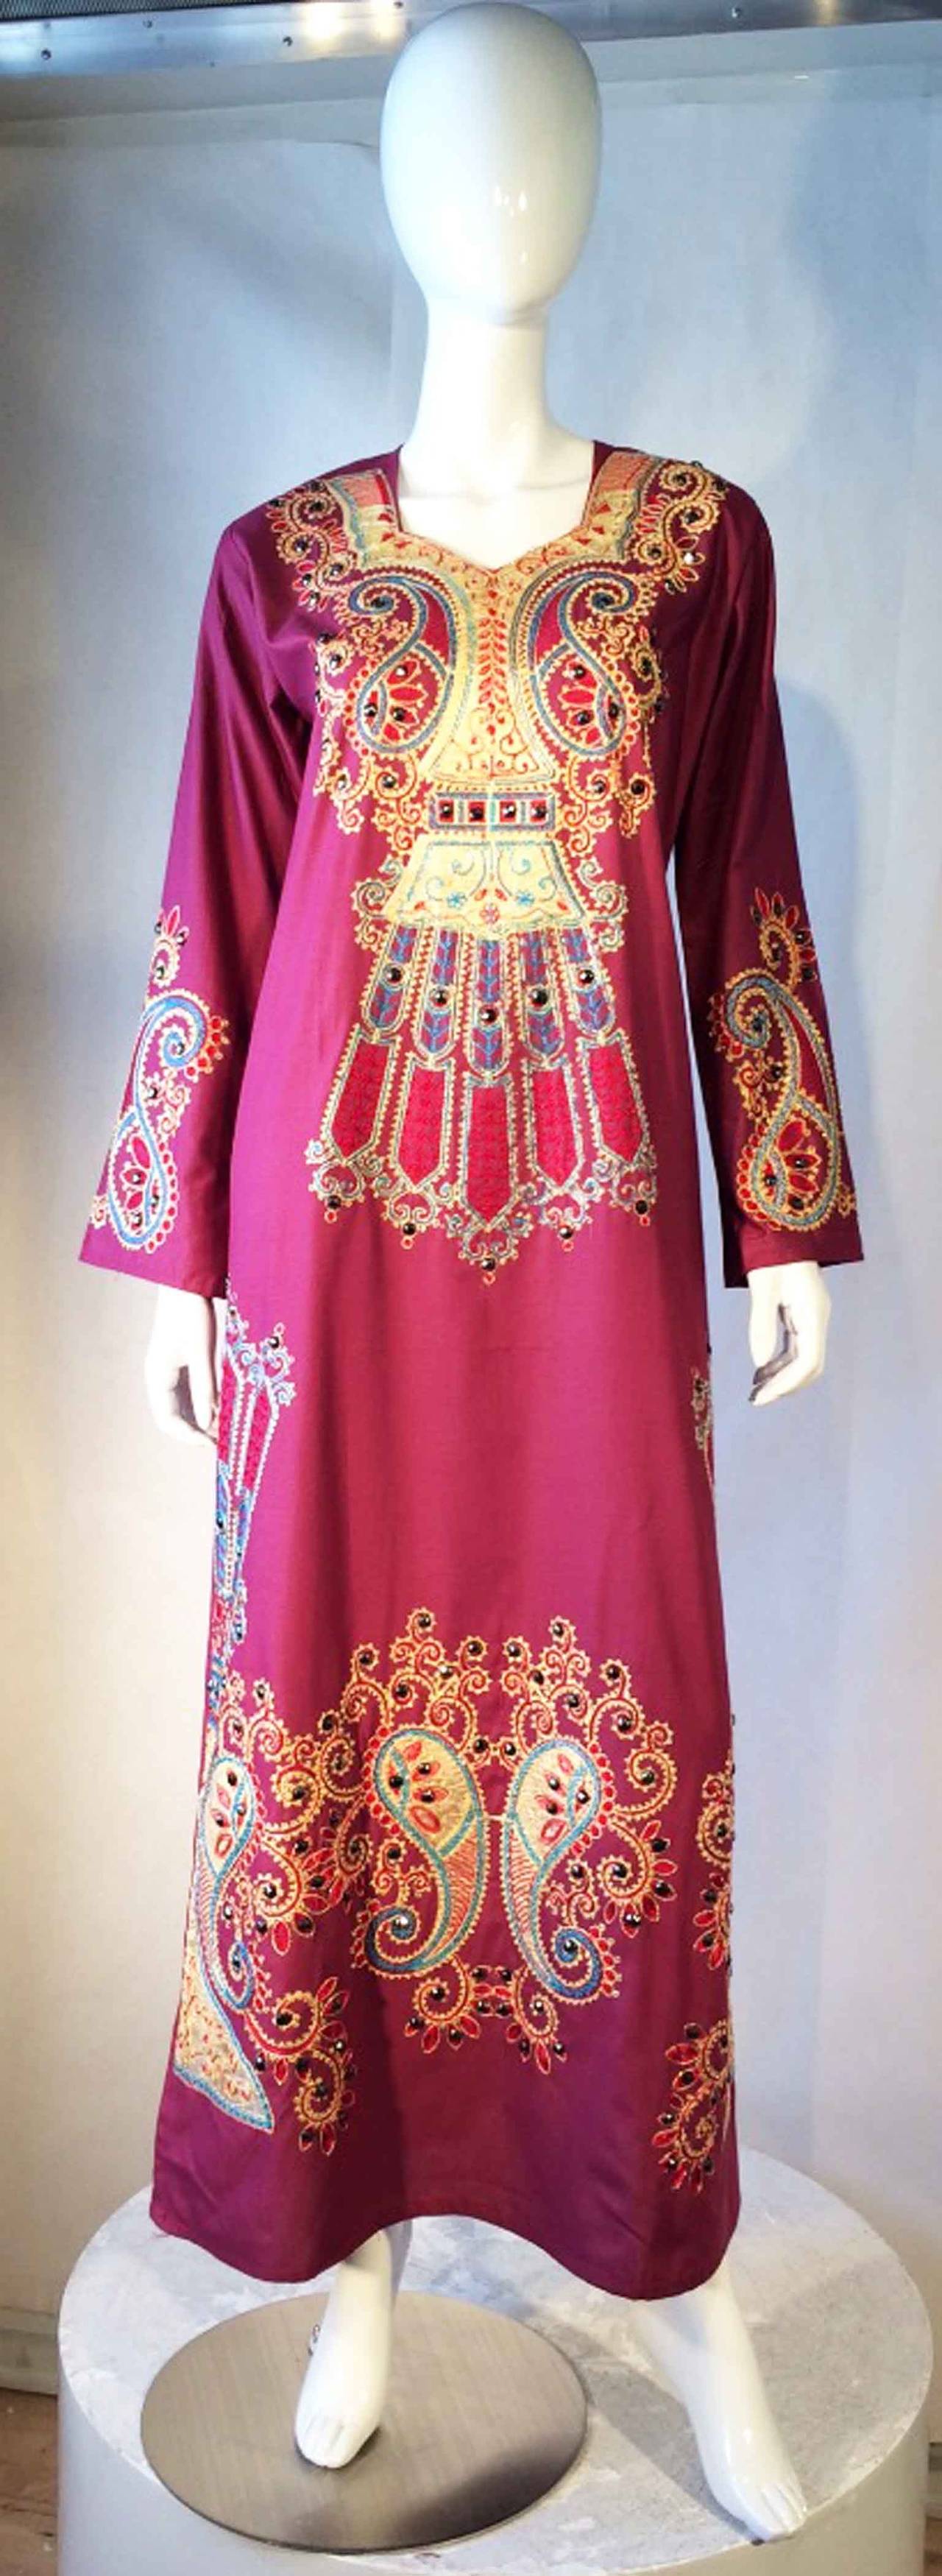 A fine vintage evening caftan. Authentic embroidered and 'jeweled' (front panel) silky fabric item slips over head with no zipper etc. Pristine unworn.